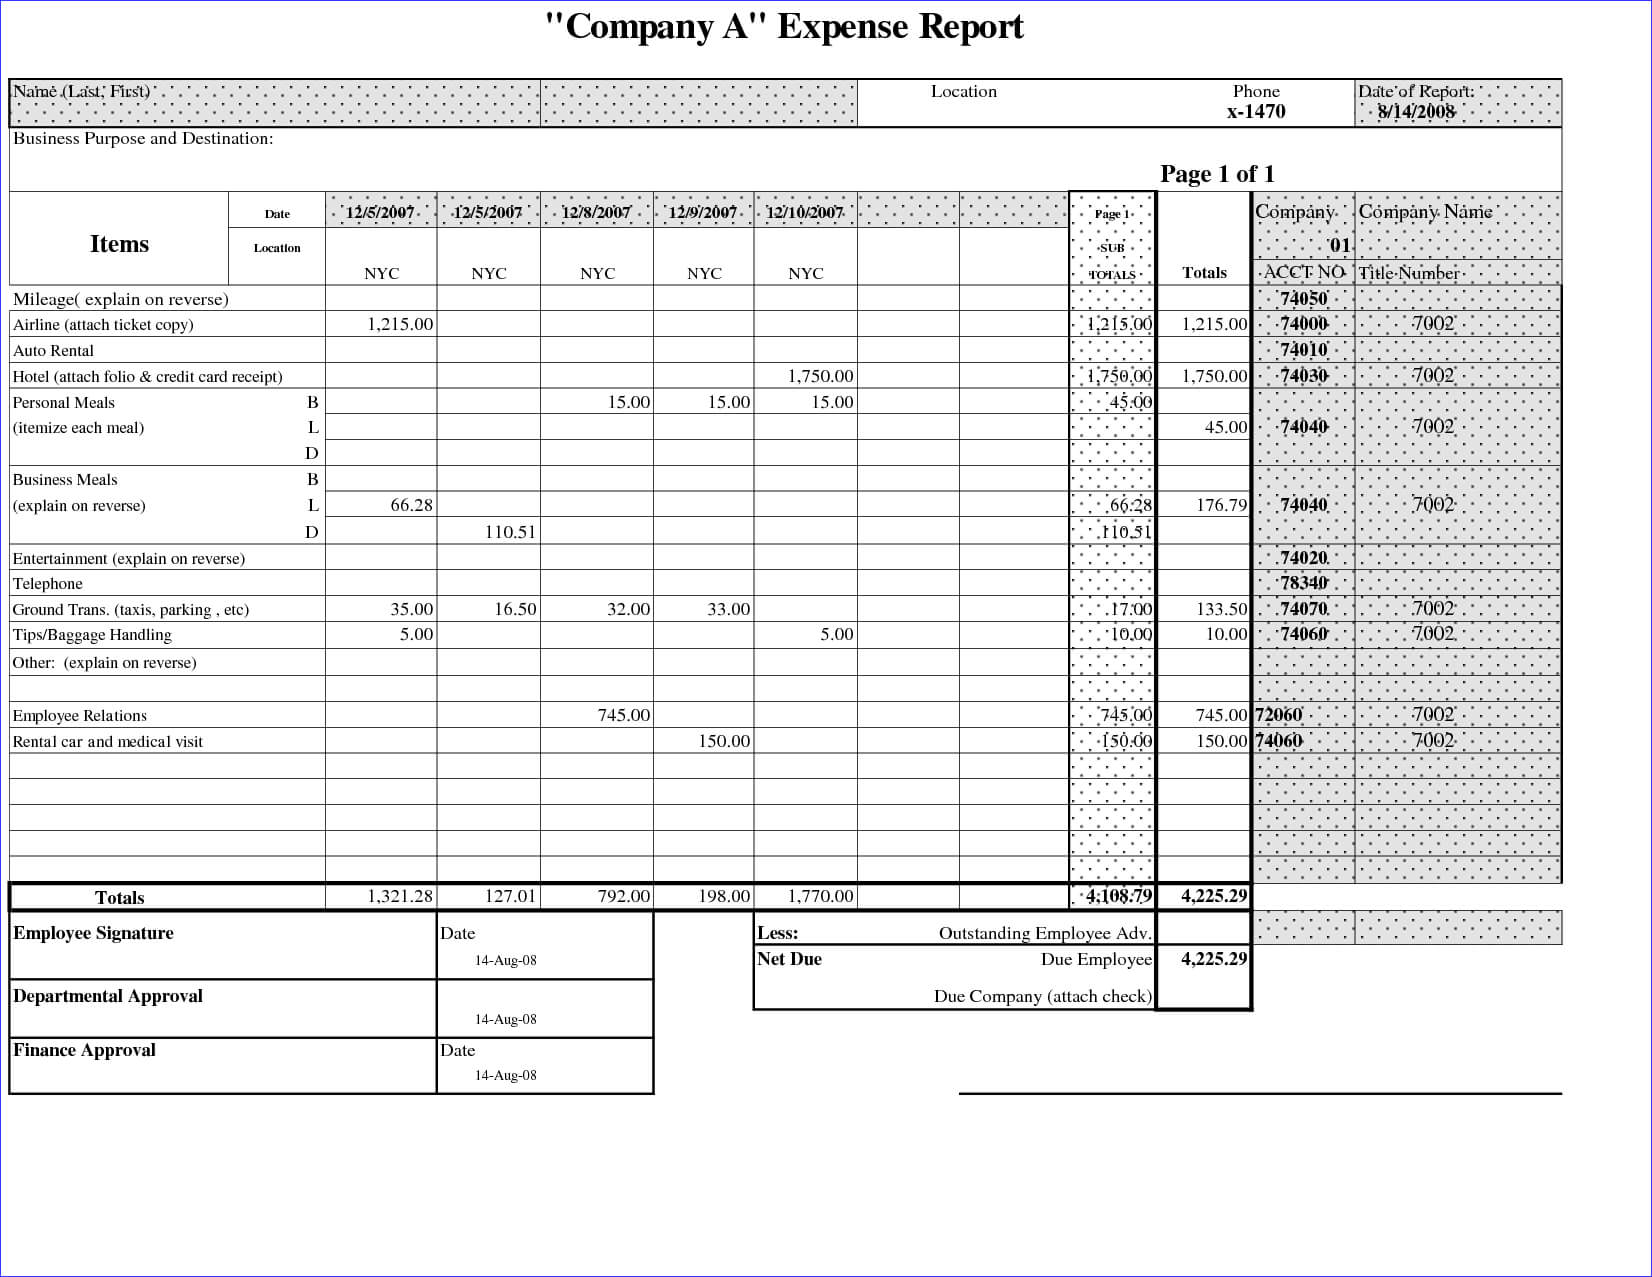 025 Business Expense Report Template Basic Company With With Company Expense Report Template